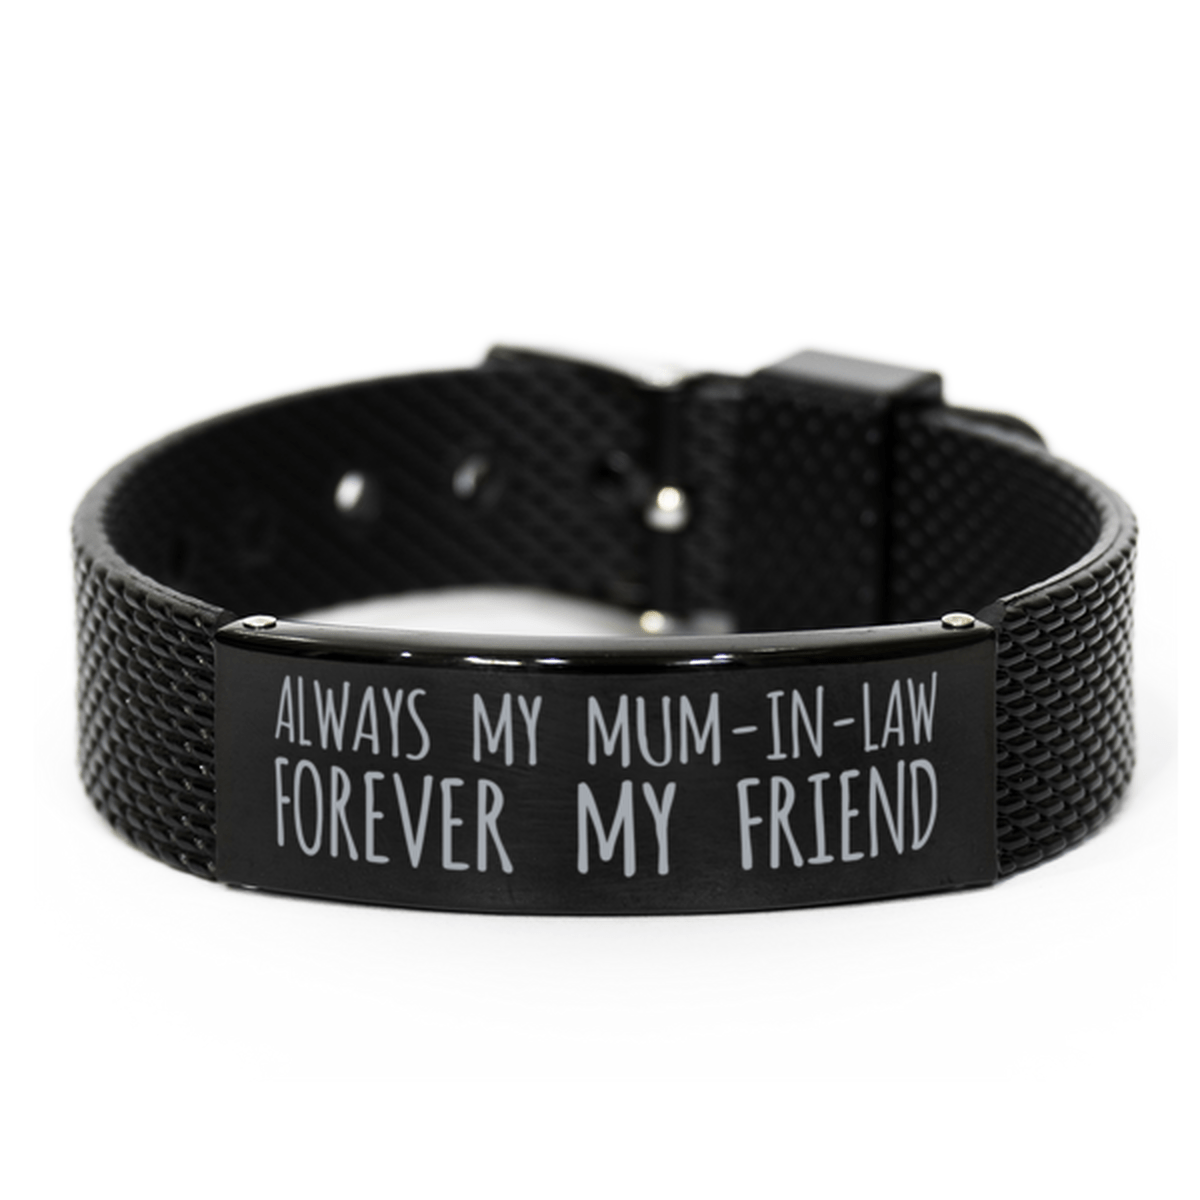 Inspirational Mum-In-Law Black Shark Mesh Bracelet, Always My Mum-In-Law Forever My Friend, Best Birthday Gifts for Family Friends